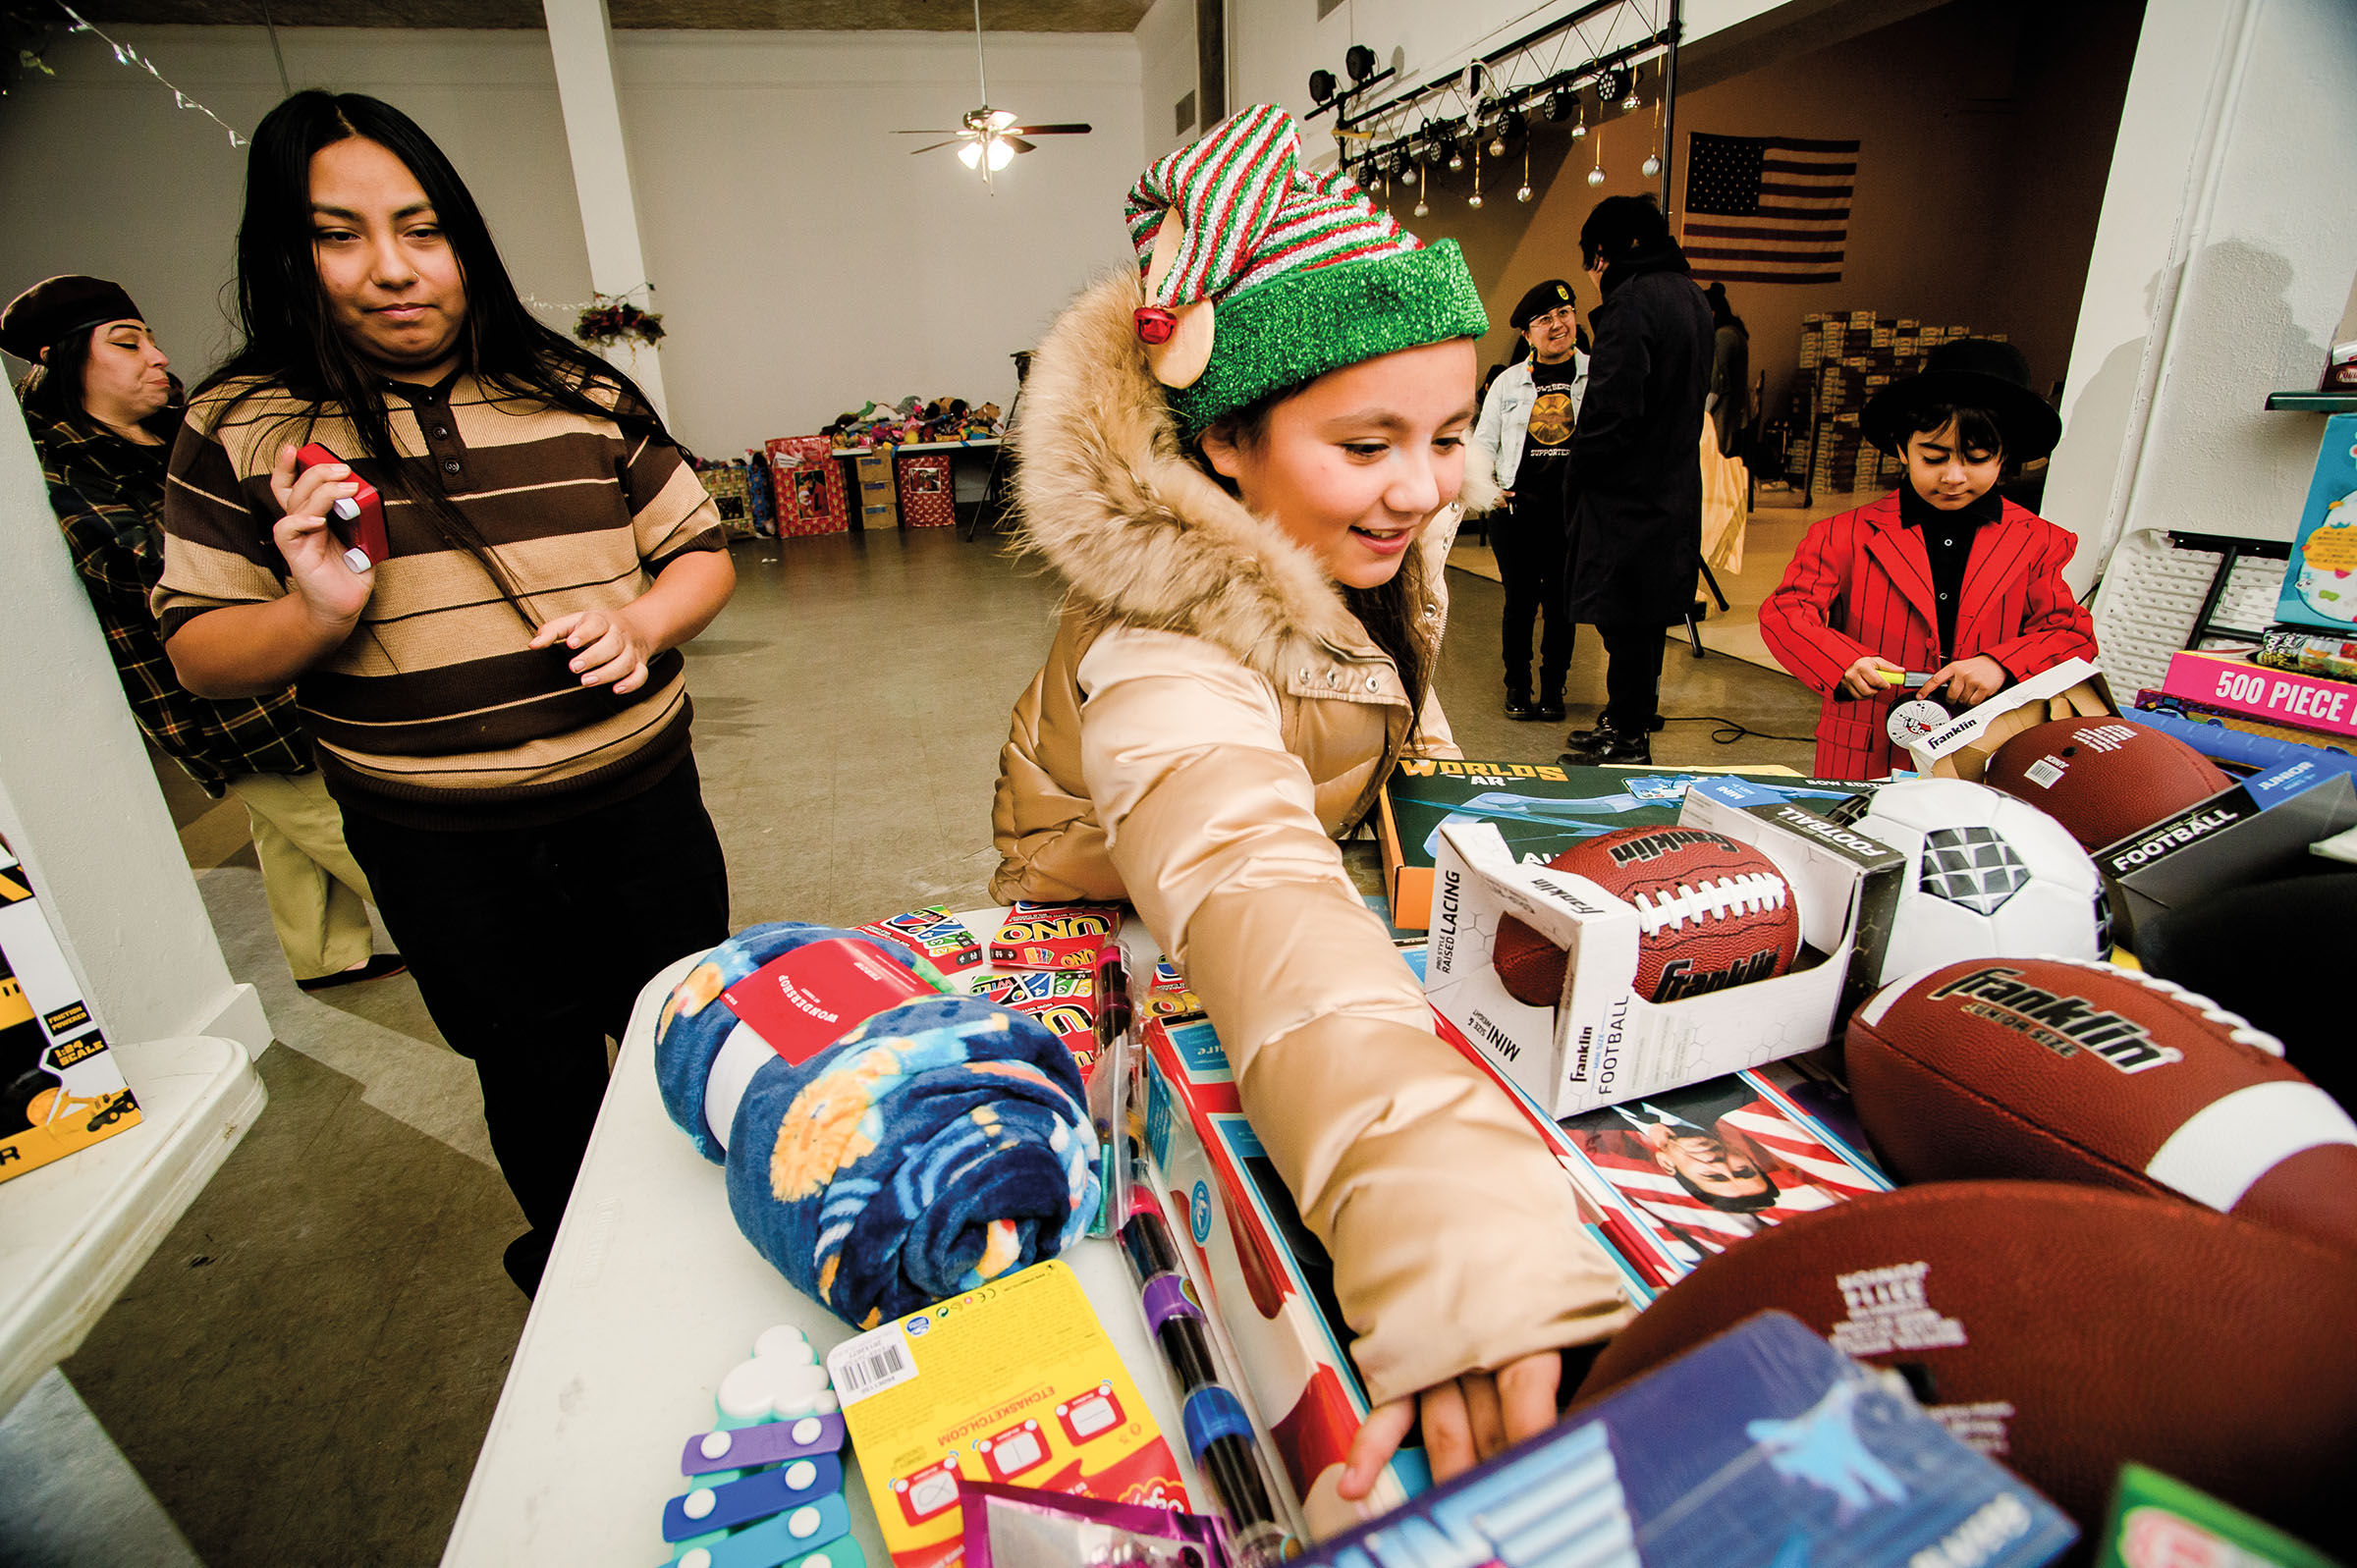 A young person wearing a striped elf hat reaches over a table full of toys and other gifts